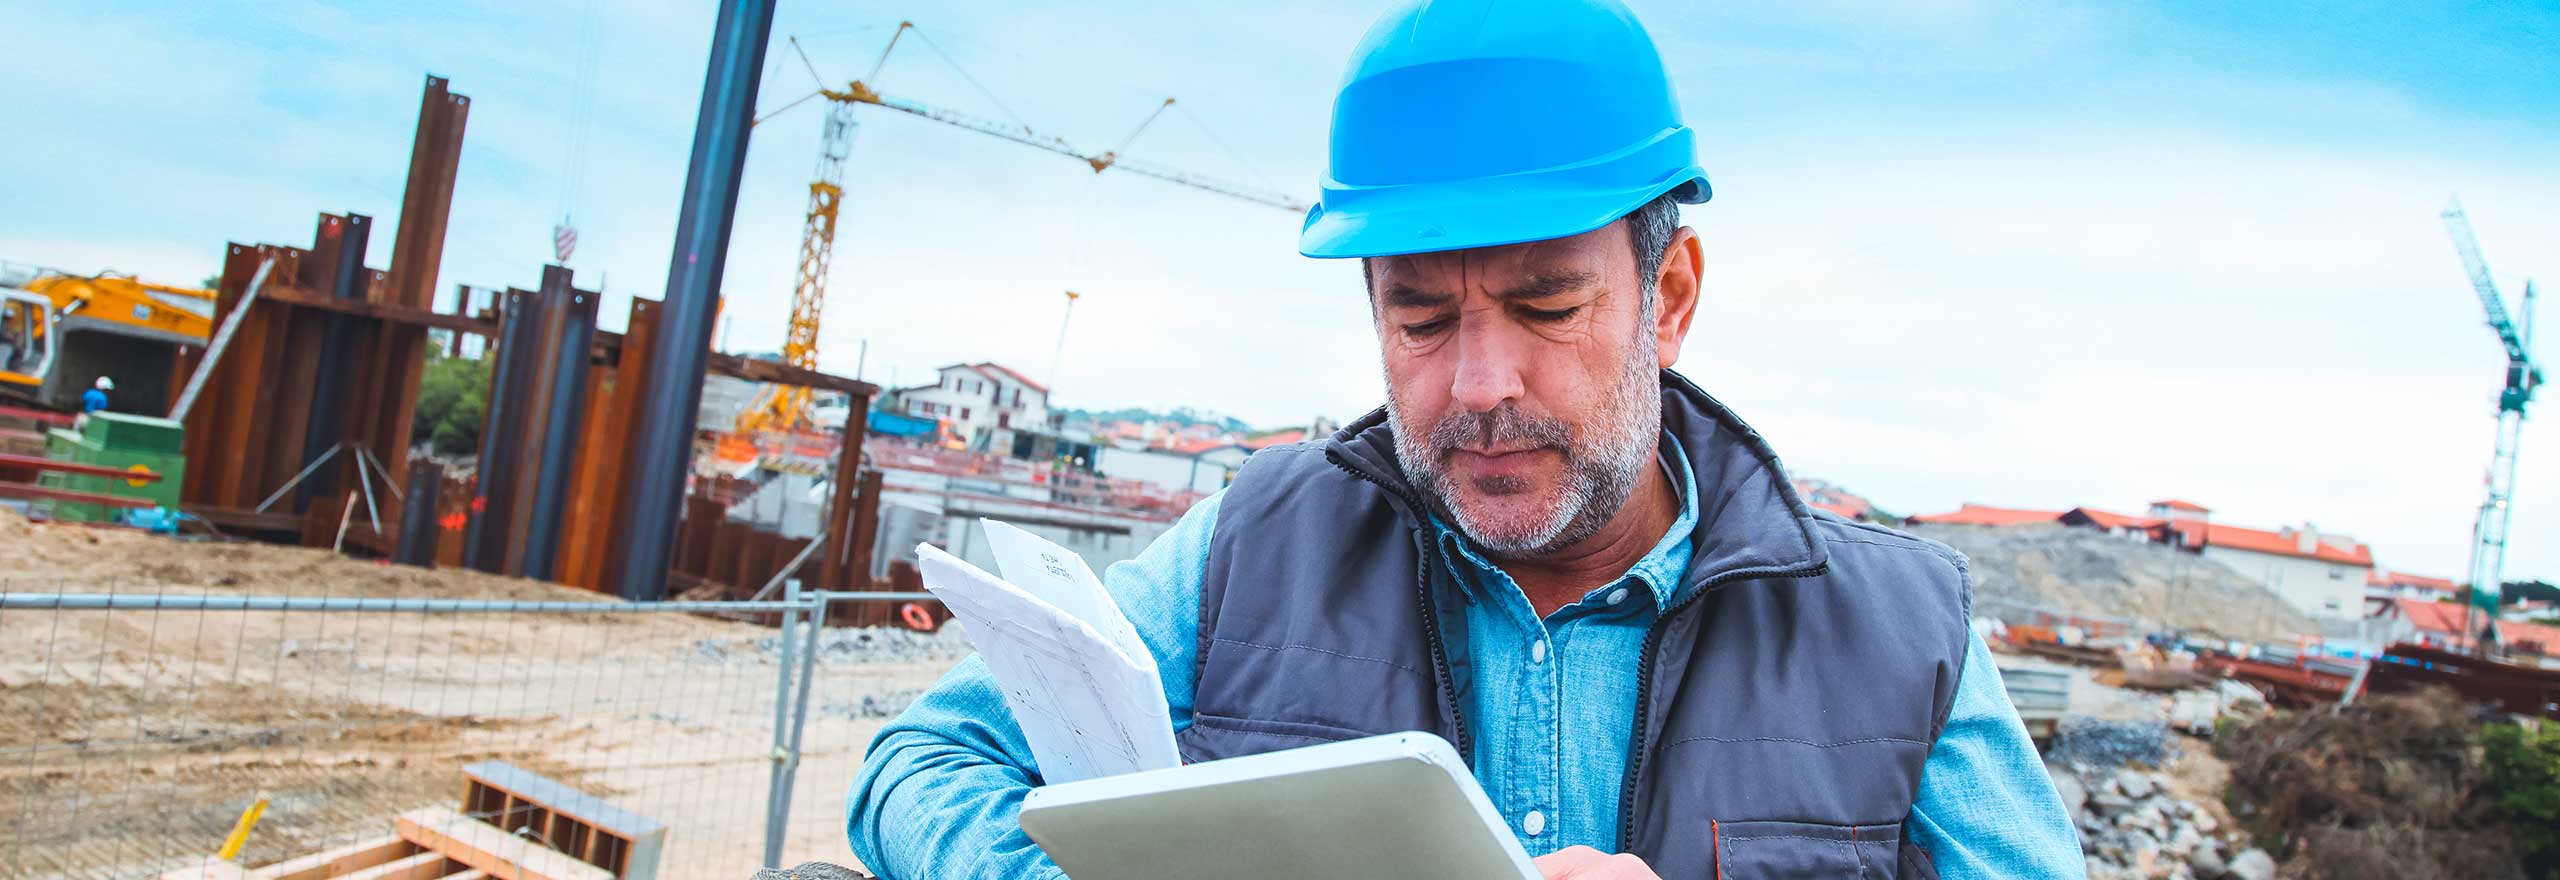 A man in hard hat reviews documents at jobsite